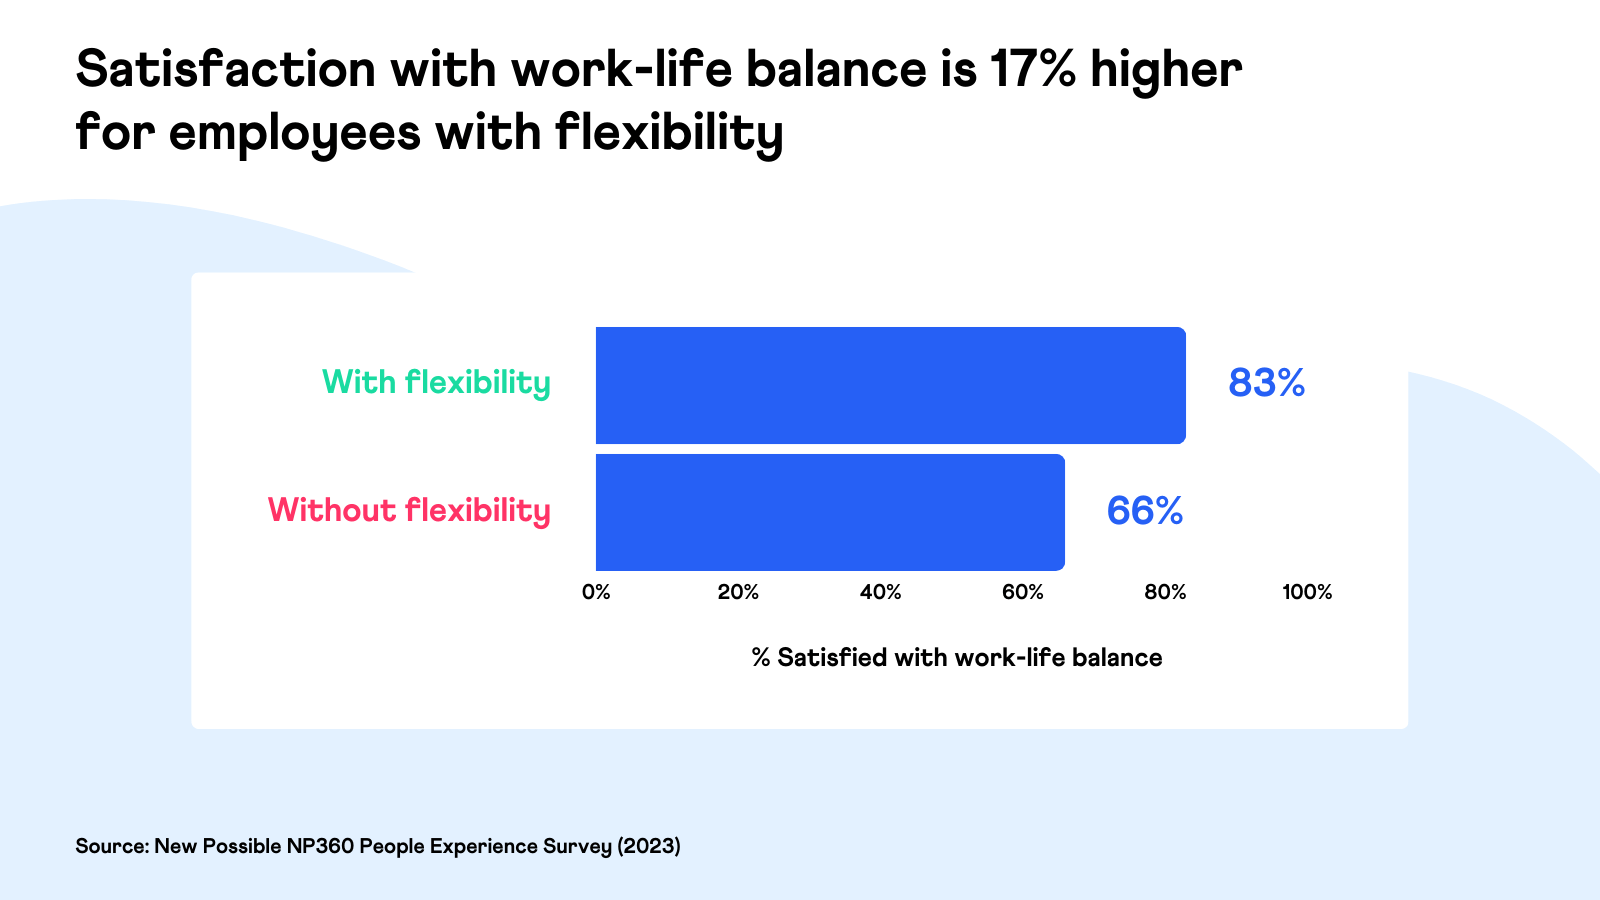 Employees with flexibility are more satisfied with work-life balance - New Possible